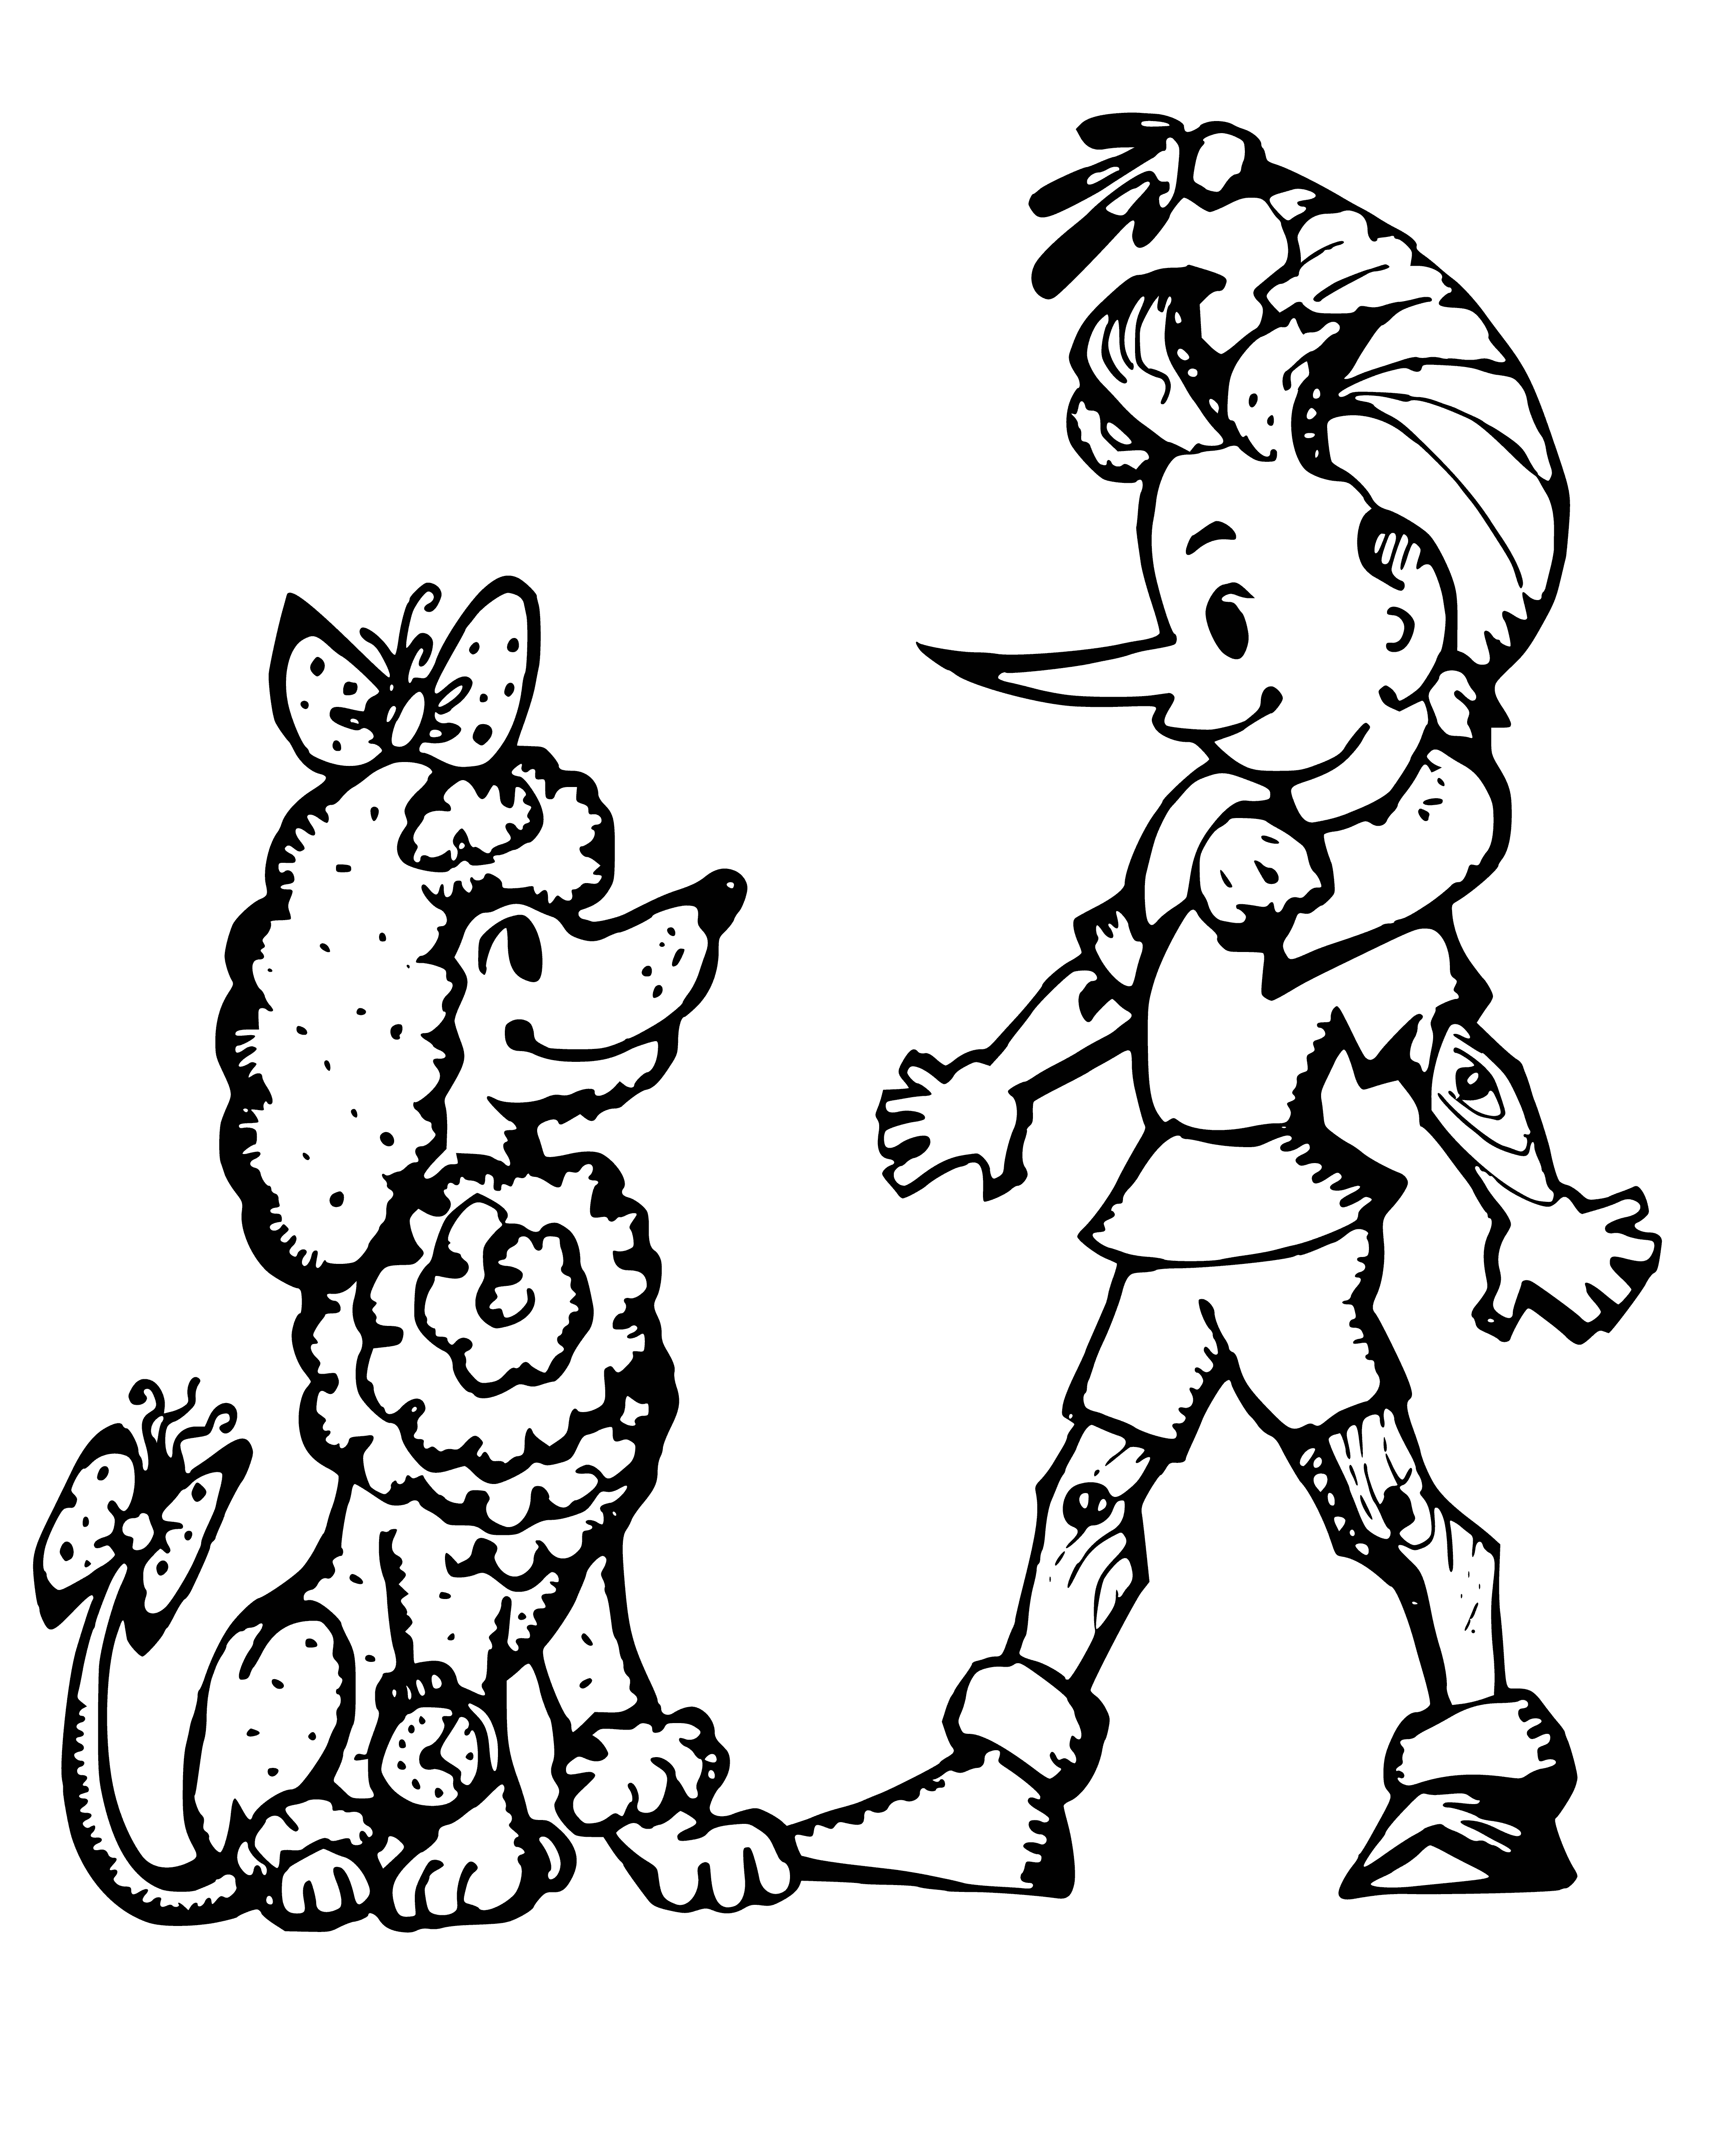 coloring page: Two friends, Poodle Artemon and Buratino, stand near the Golden Key. Artemon wears a blue coat & red scarf, Buratino a red coat & blue scarf. Both have big noses! #coloringpage #friendship